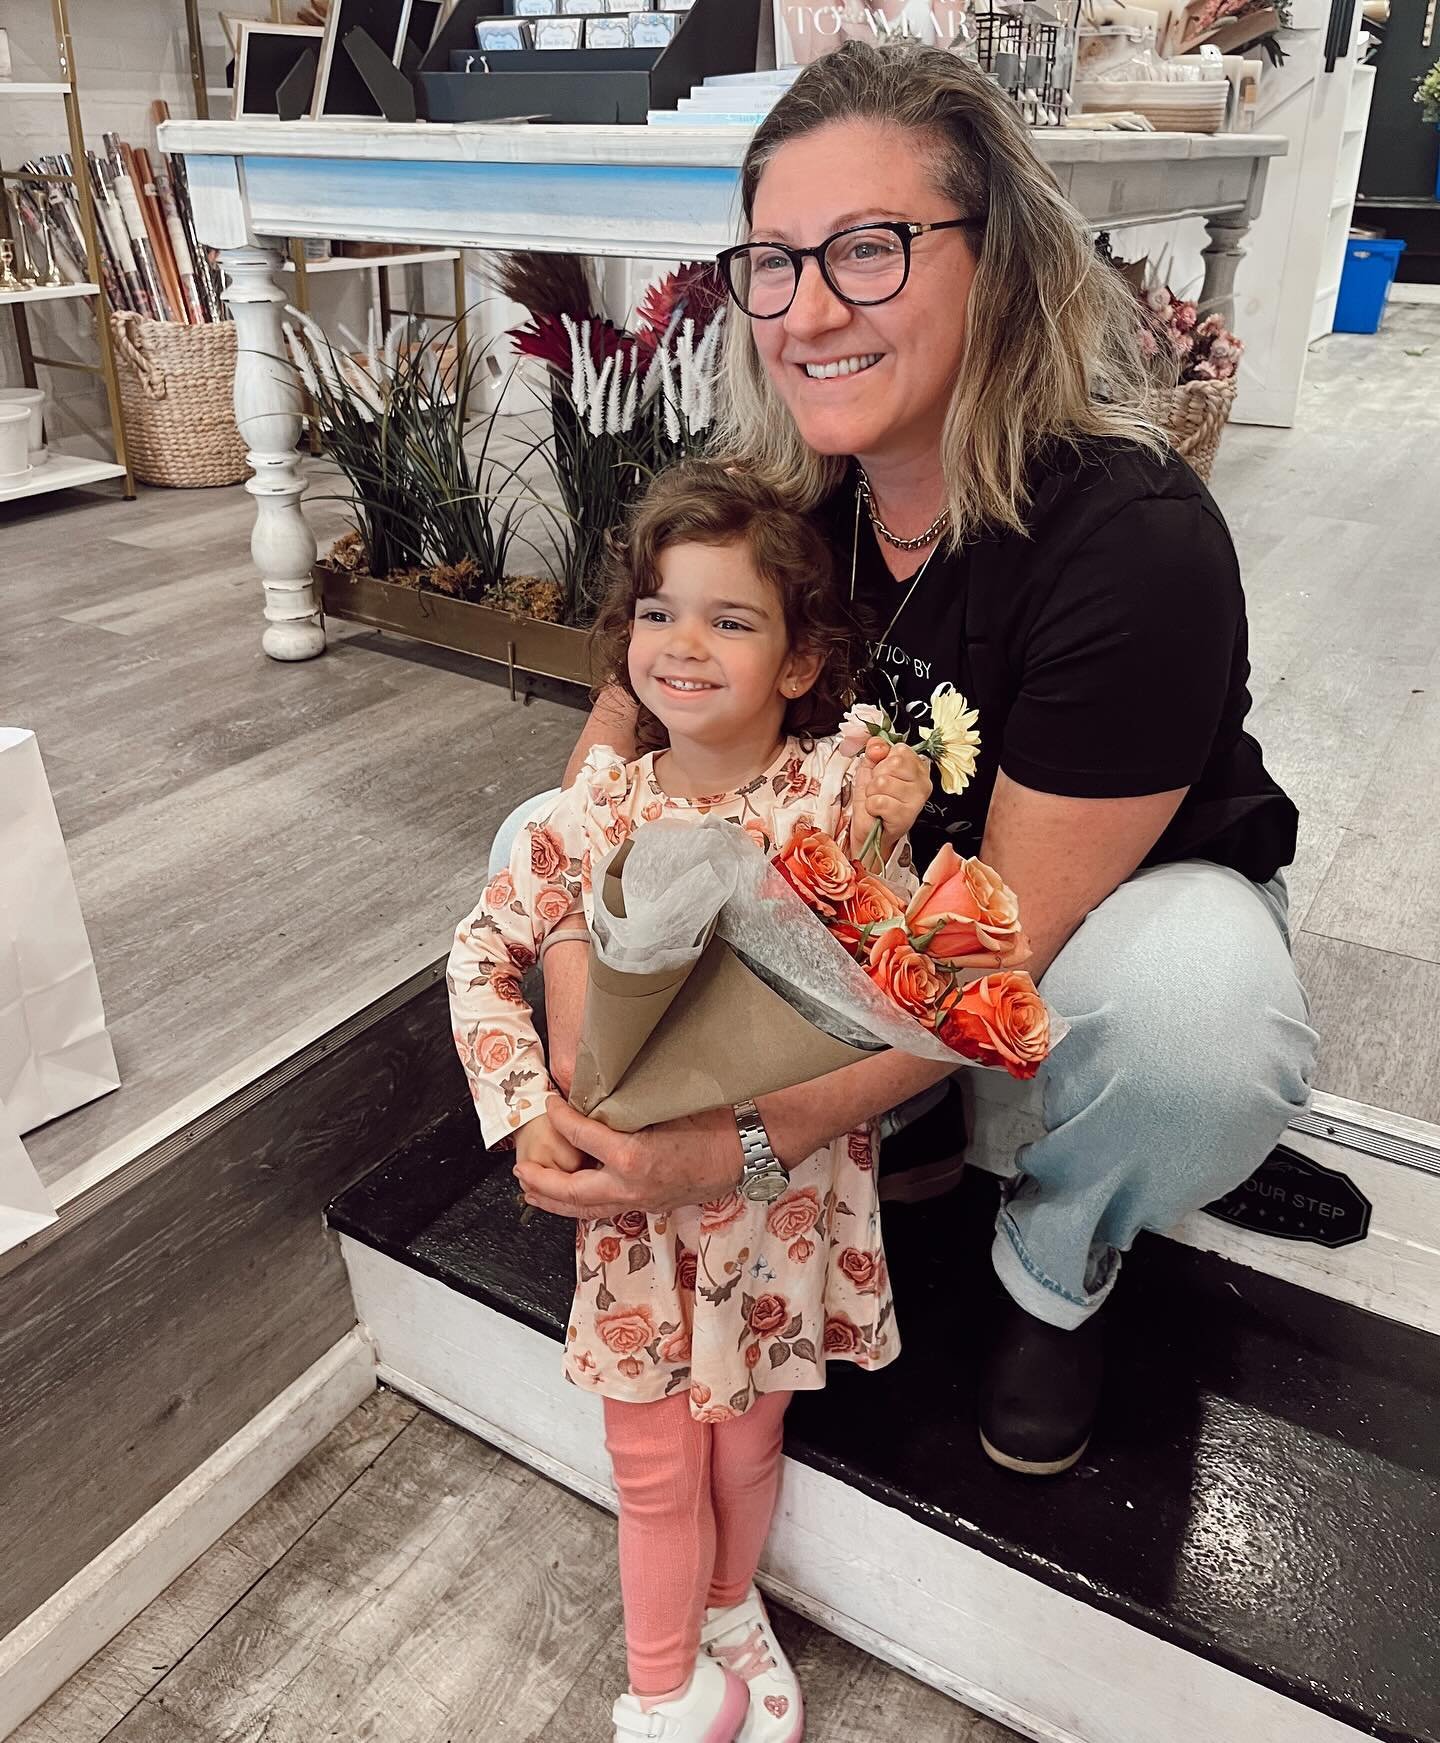 We know we&rsquo;re not supposed to have favorite customers &hellip;&hellip;&hellip;&hellip;&hellip;&hellip;.. but Lucia is definitely our favorite customer ☺️🥰